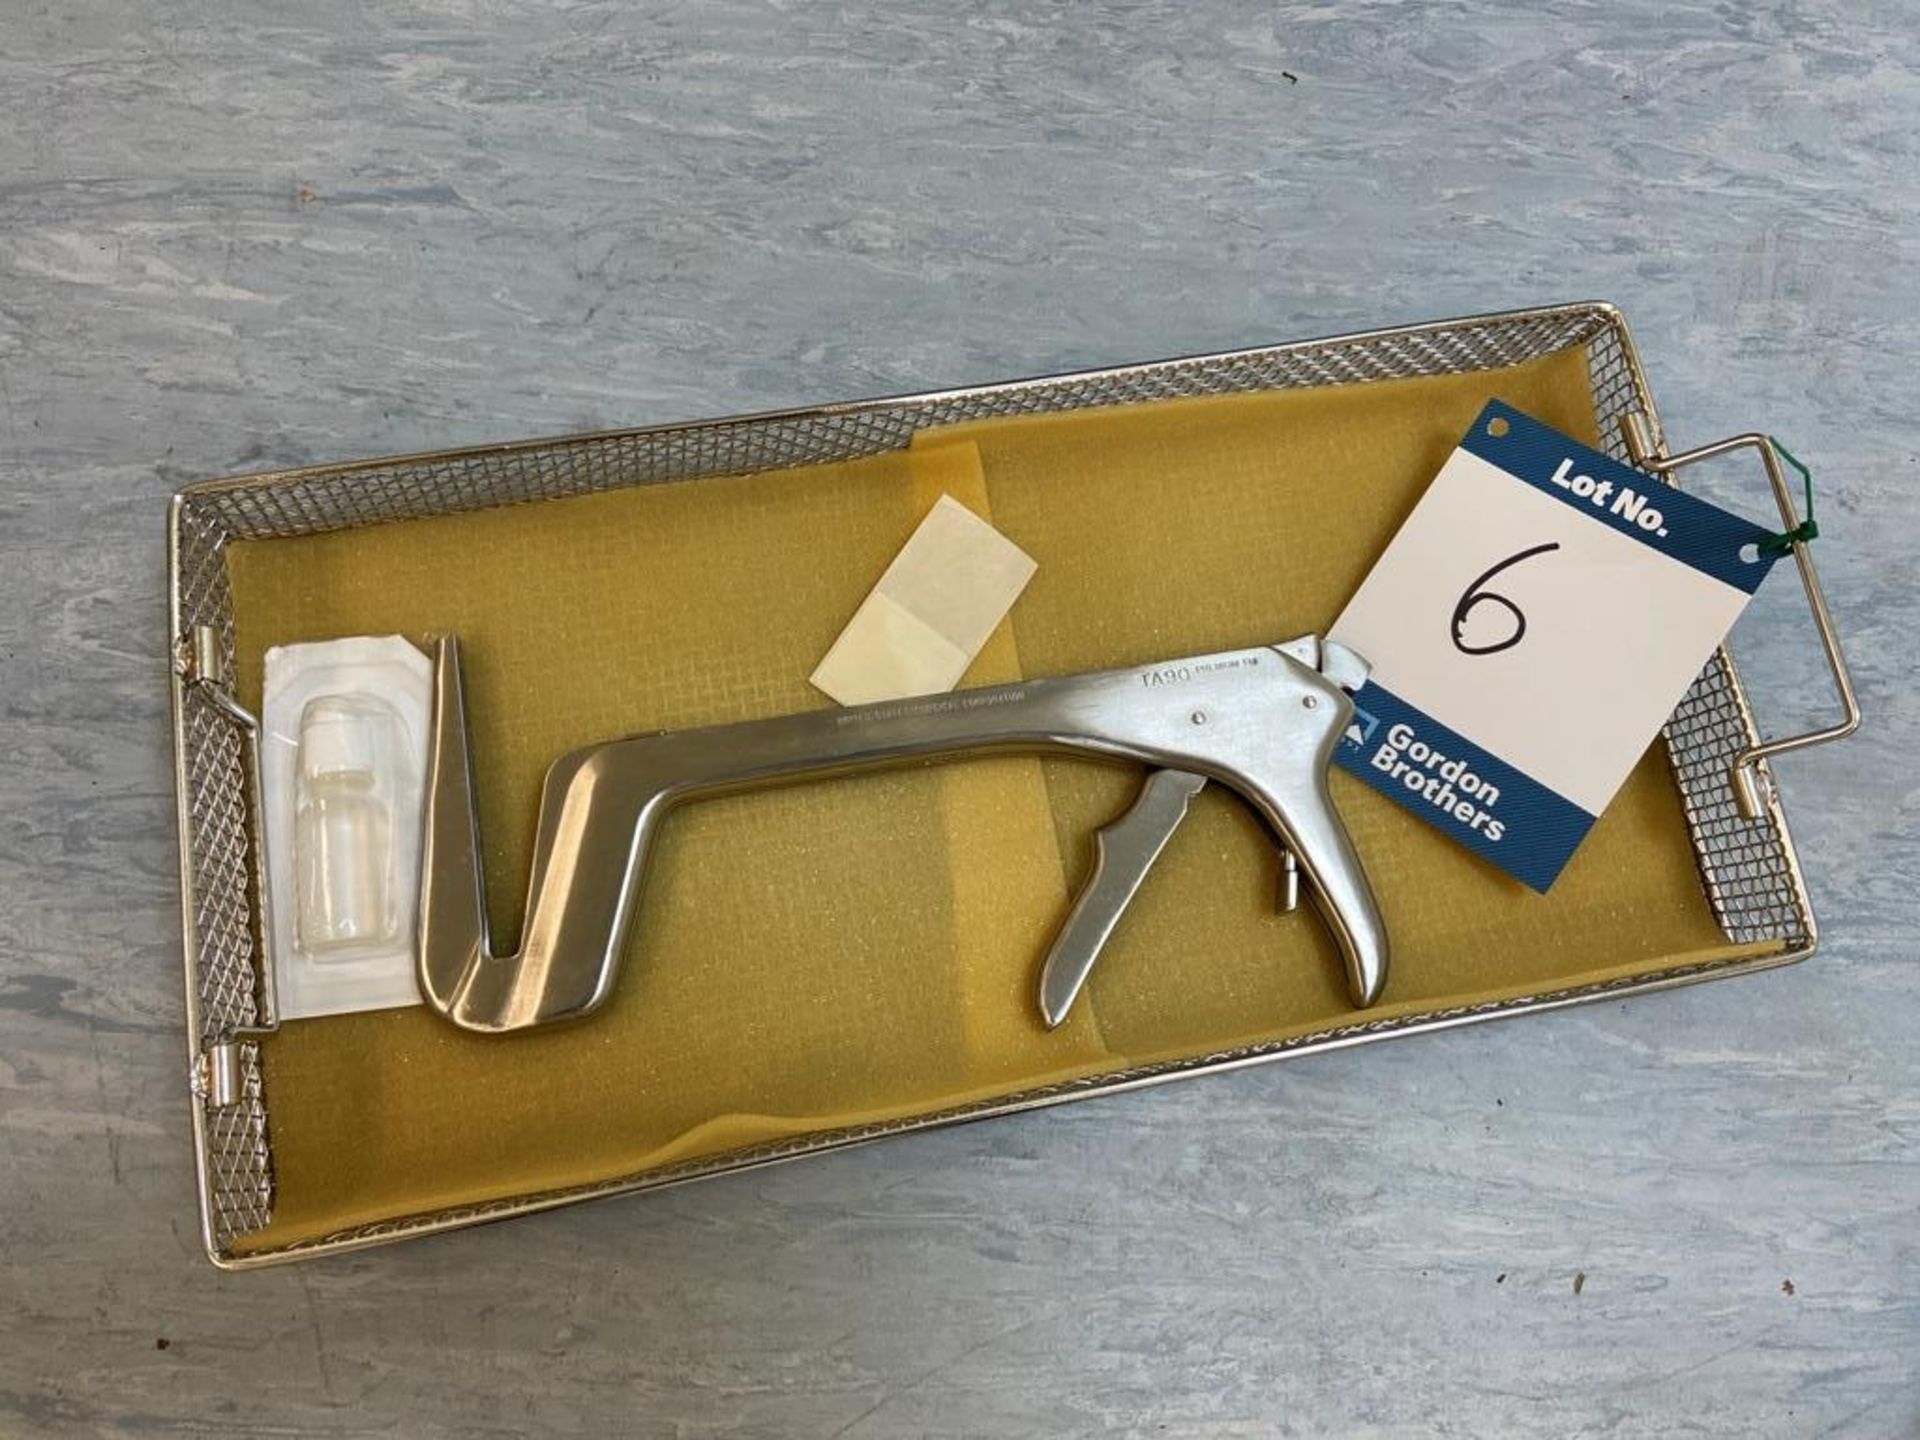 United States Surgical Corporation TA90 auto suture/stainless steel stapler with sterilisation tray